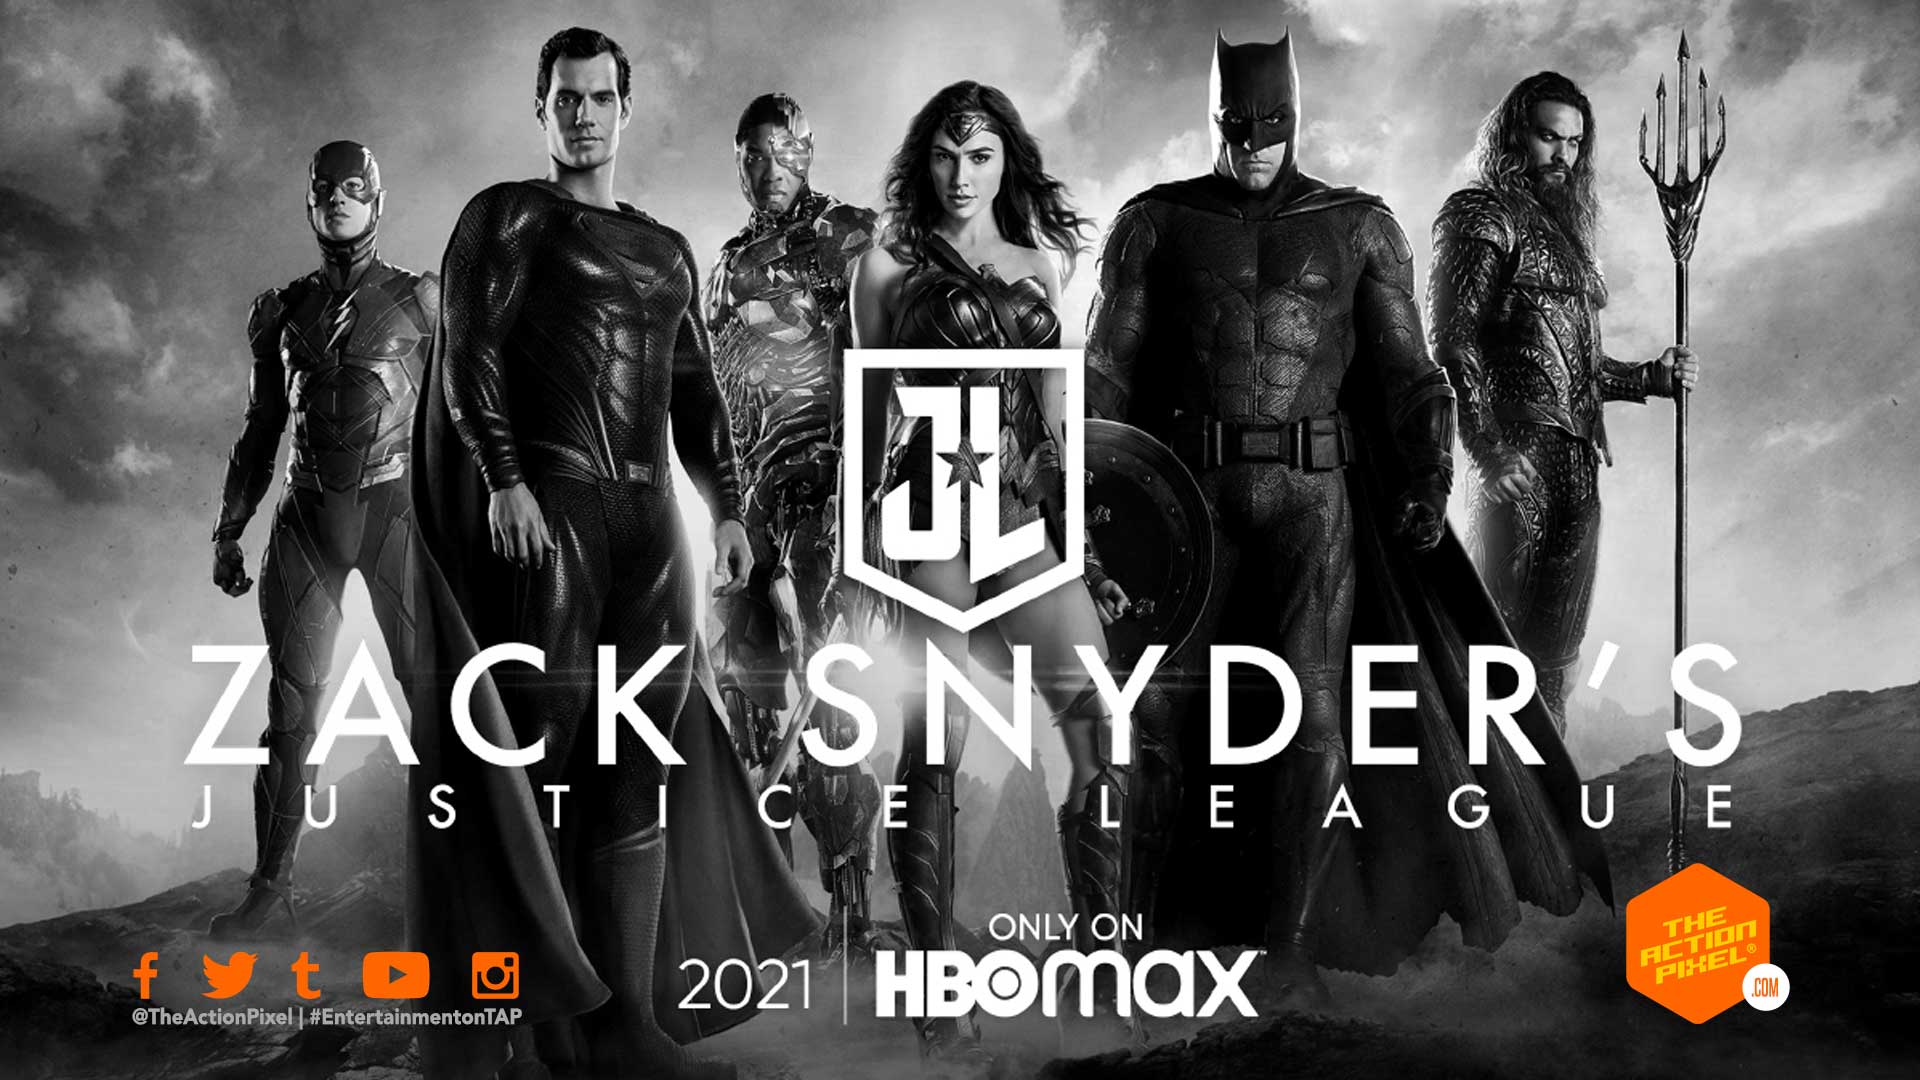 justice league, release the snyder cut, zack snyder, hbo max, the action pixel, entertainment on tap, hbo, hbo max justice league, featured, batman, wonder woman, aquaman, cyborg, the flash, flash, wb pictures, dc comics, warner bros. pictures,